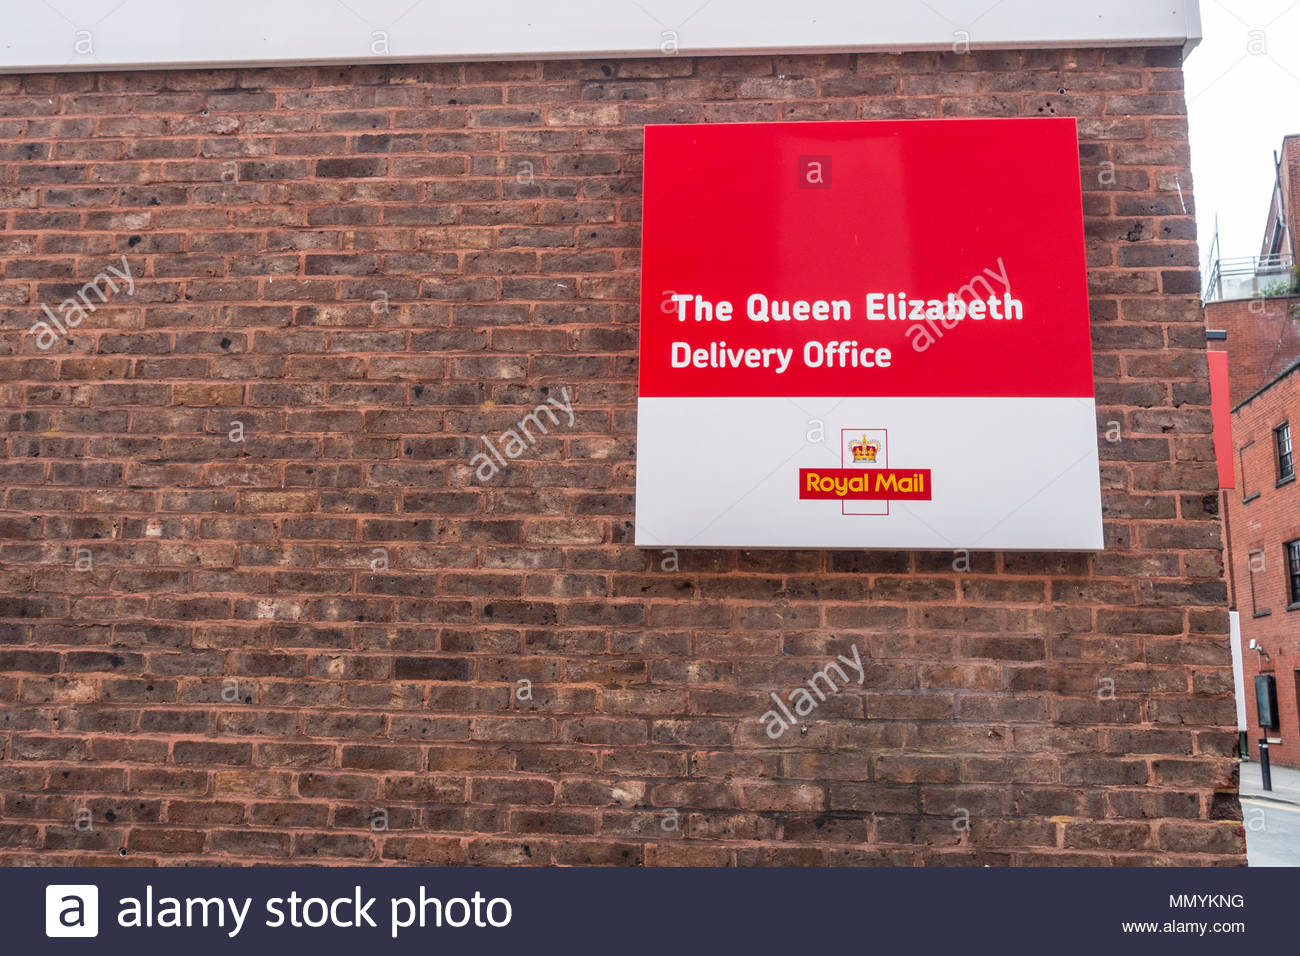 Royal mail delivery office